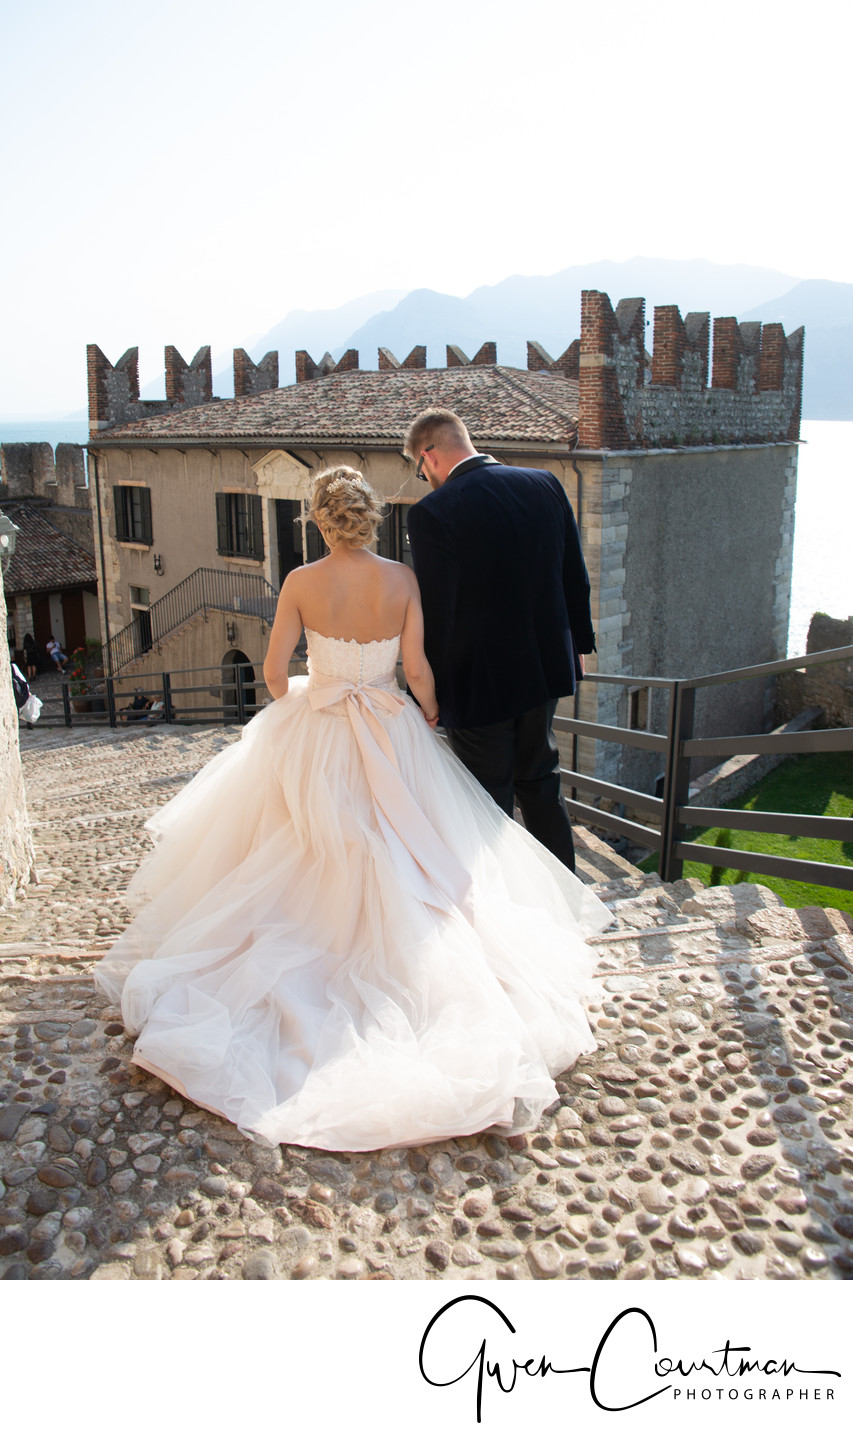 Stunning wedding venues in Italy.